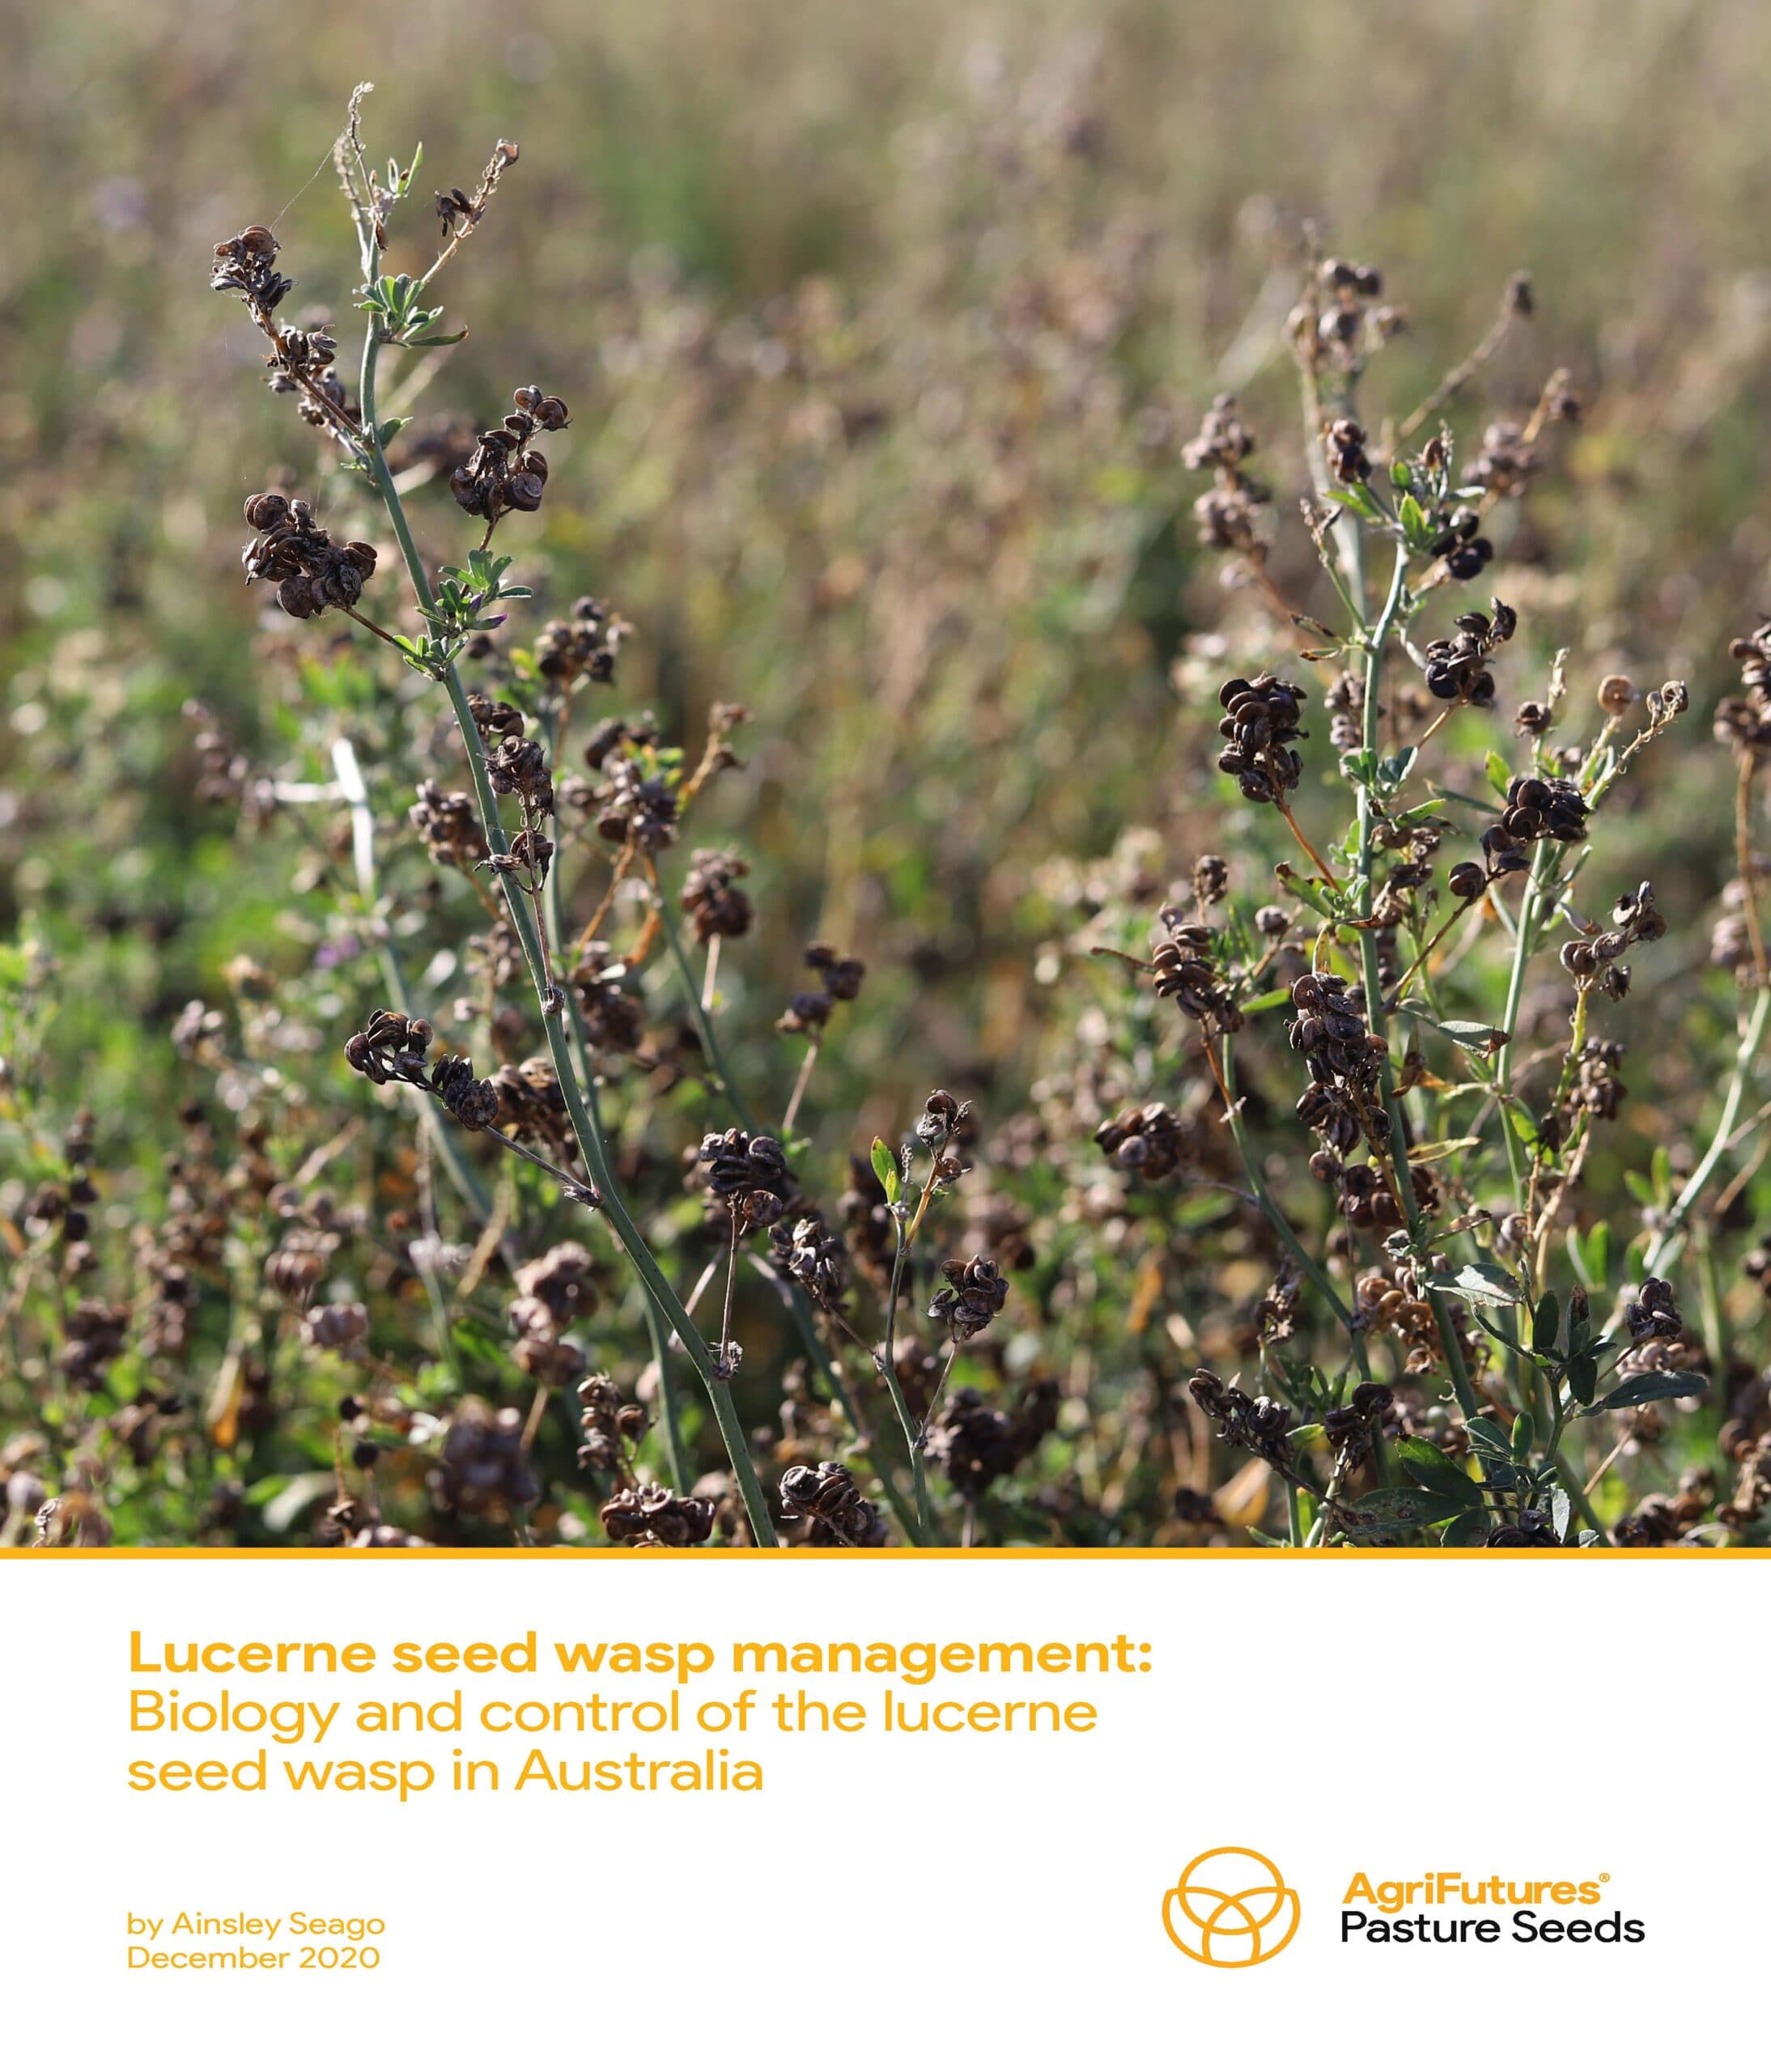 Lucerne seed wasp management: Biology and control of the lucerne seed wasp in Australia - image